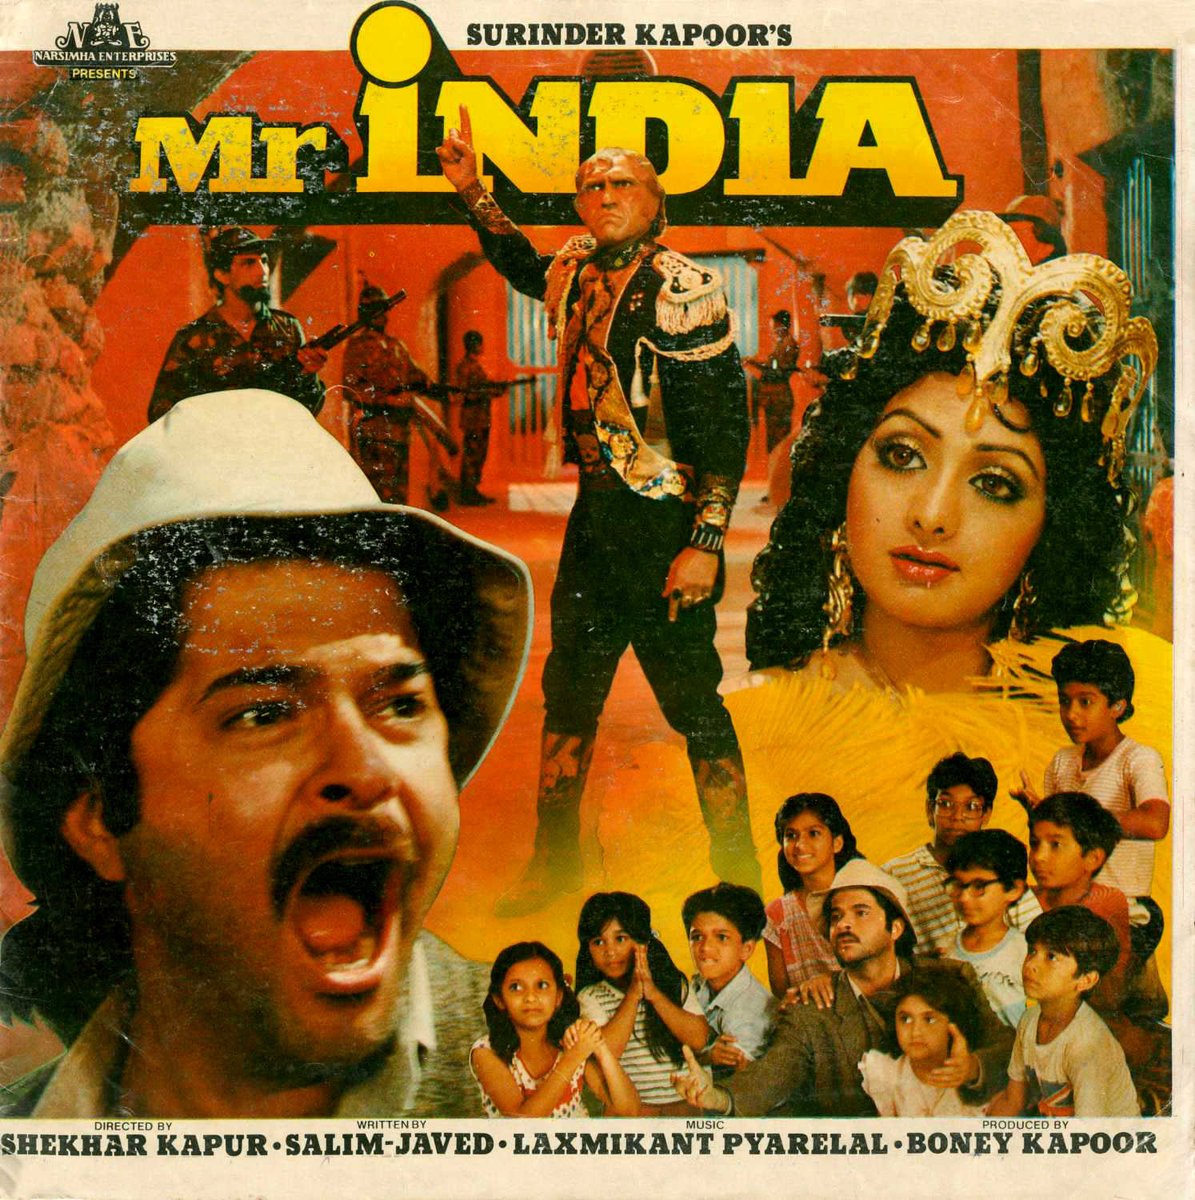 #32YearsOfMrIndia it is. But oye, this movie is just ageless. Ain't it? For all seasons & ages. Am not keen on its sequel. Show this 1 to me on the big screen AGAIN & AGAIN.
#Sridevi 
#SrideviLivesForever 
#SrideviIsImmortal 
#SrideviTheHero 
#SrideviScoresCentury